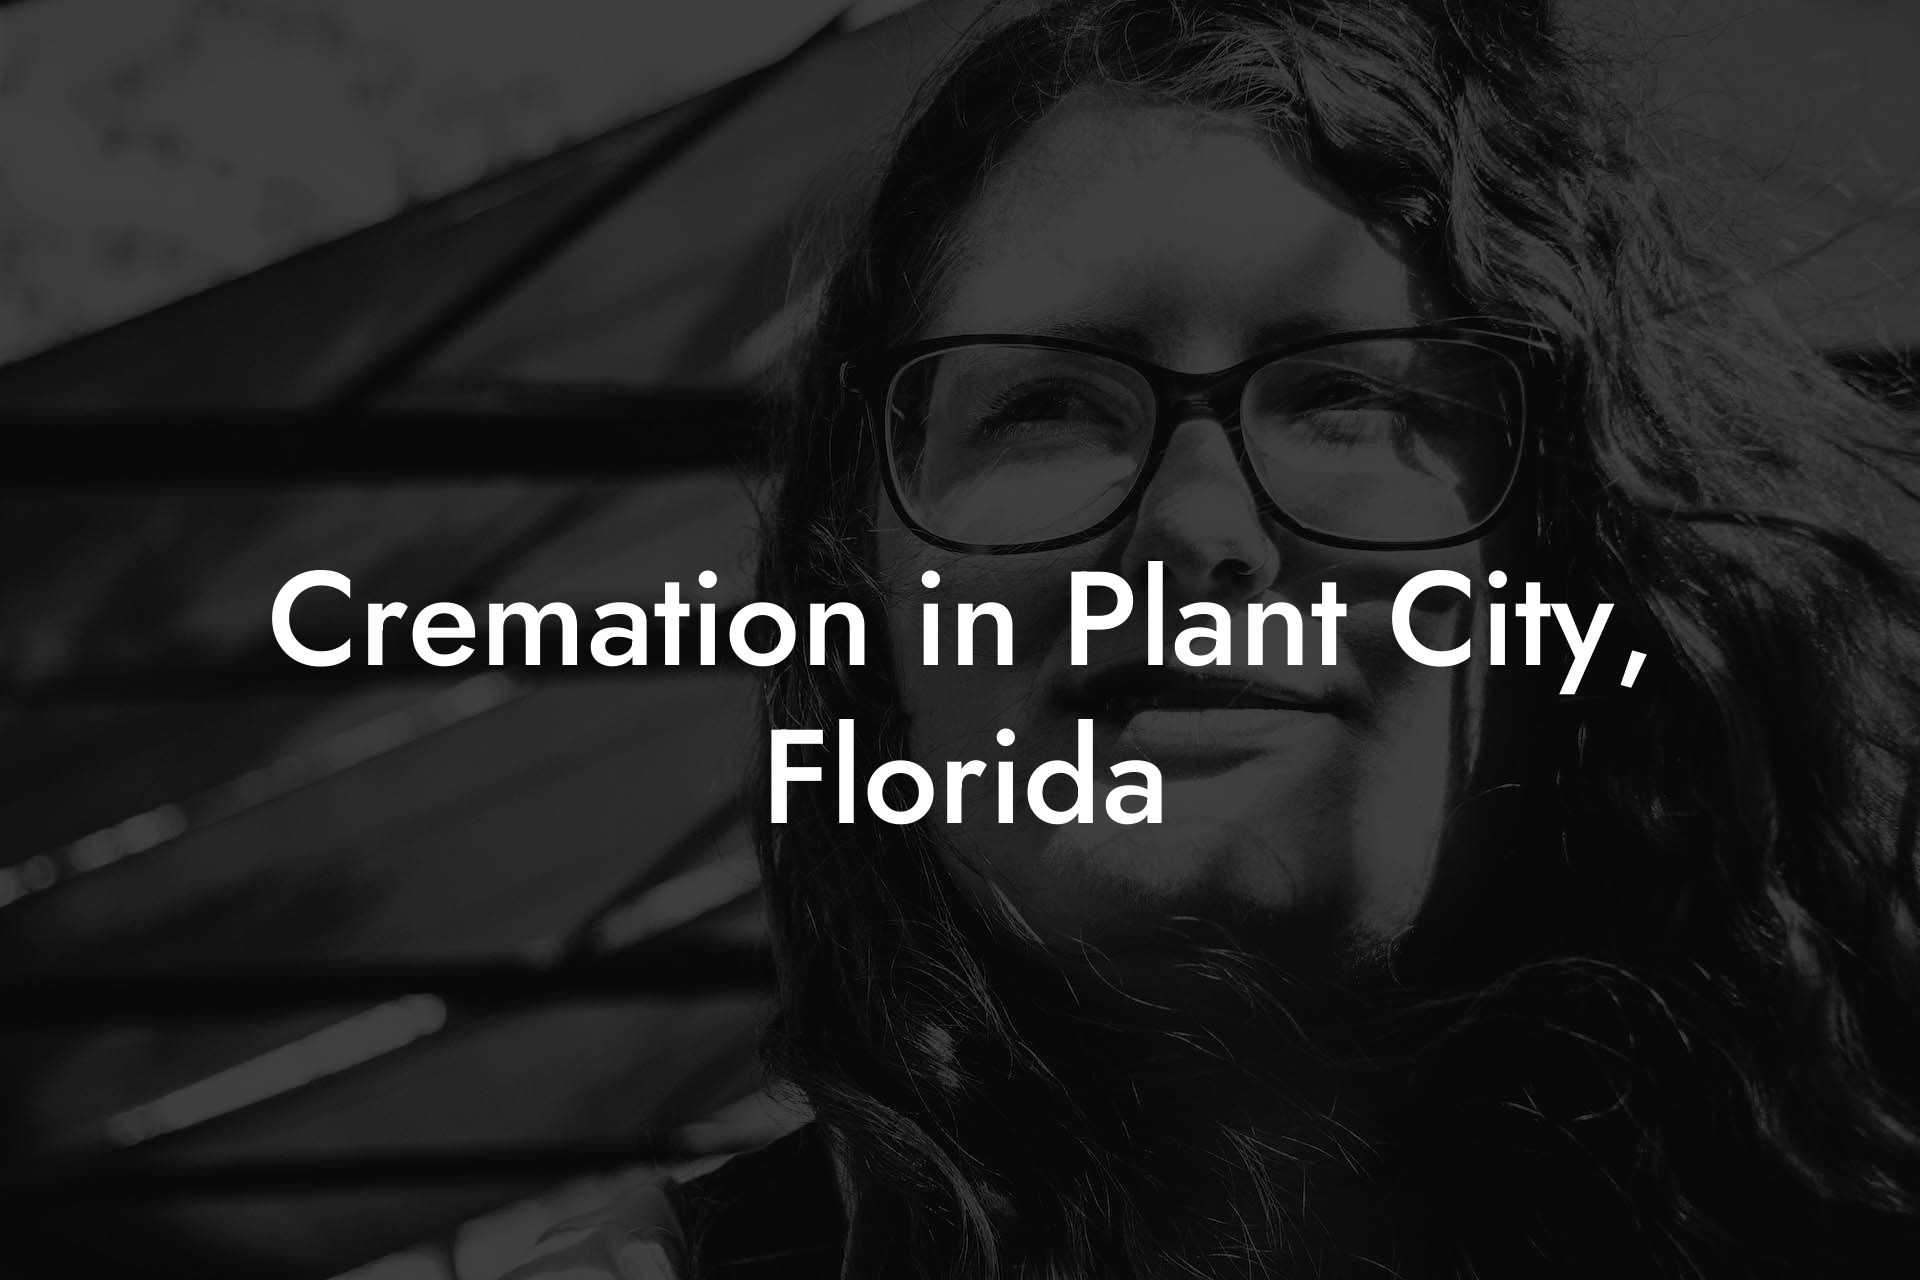 Cremation in Plant City, Florida